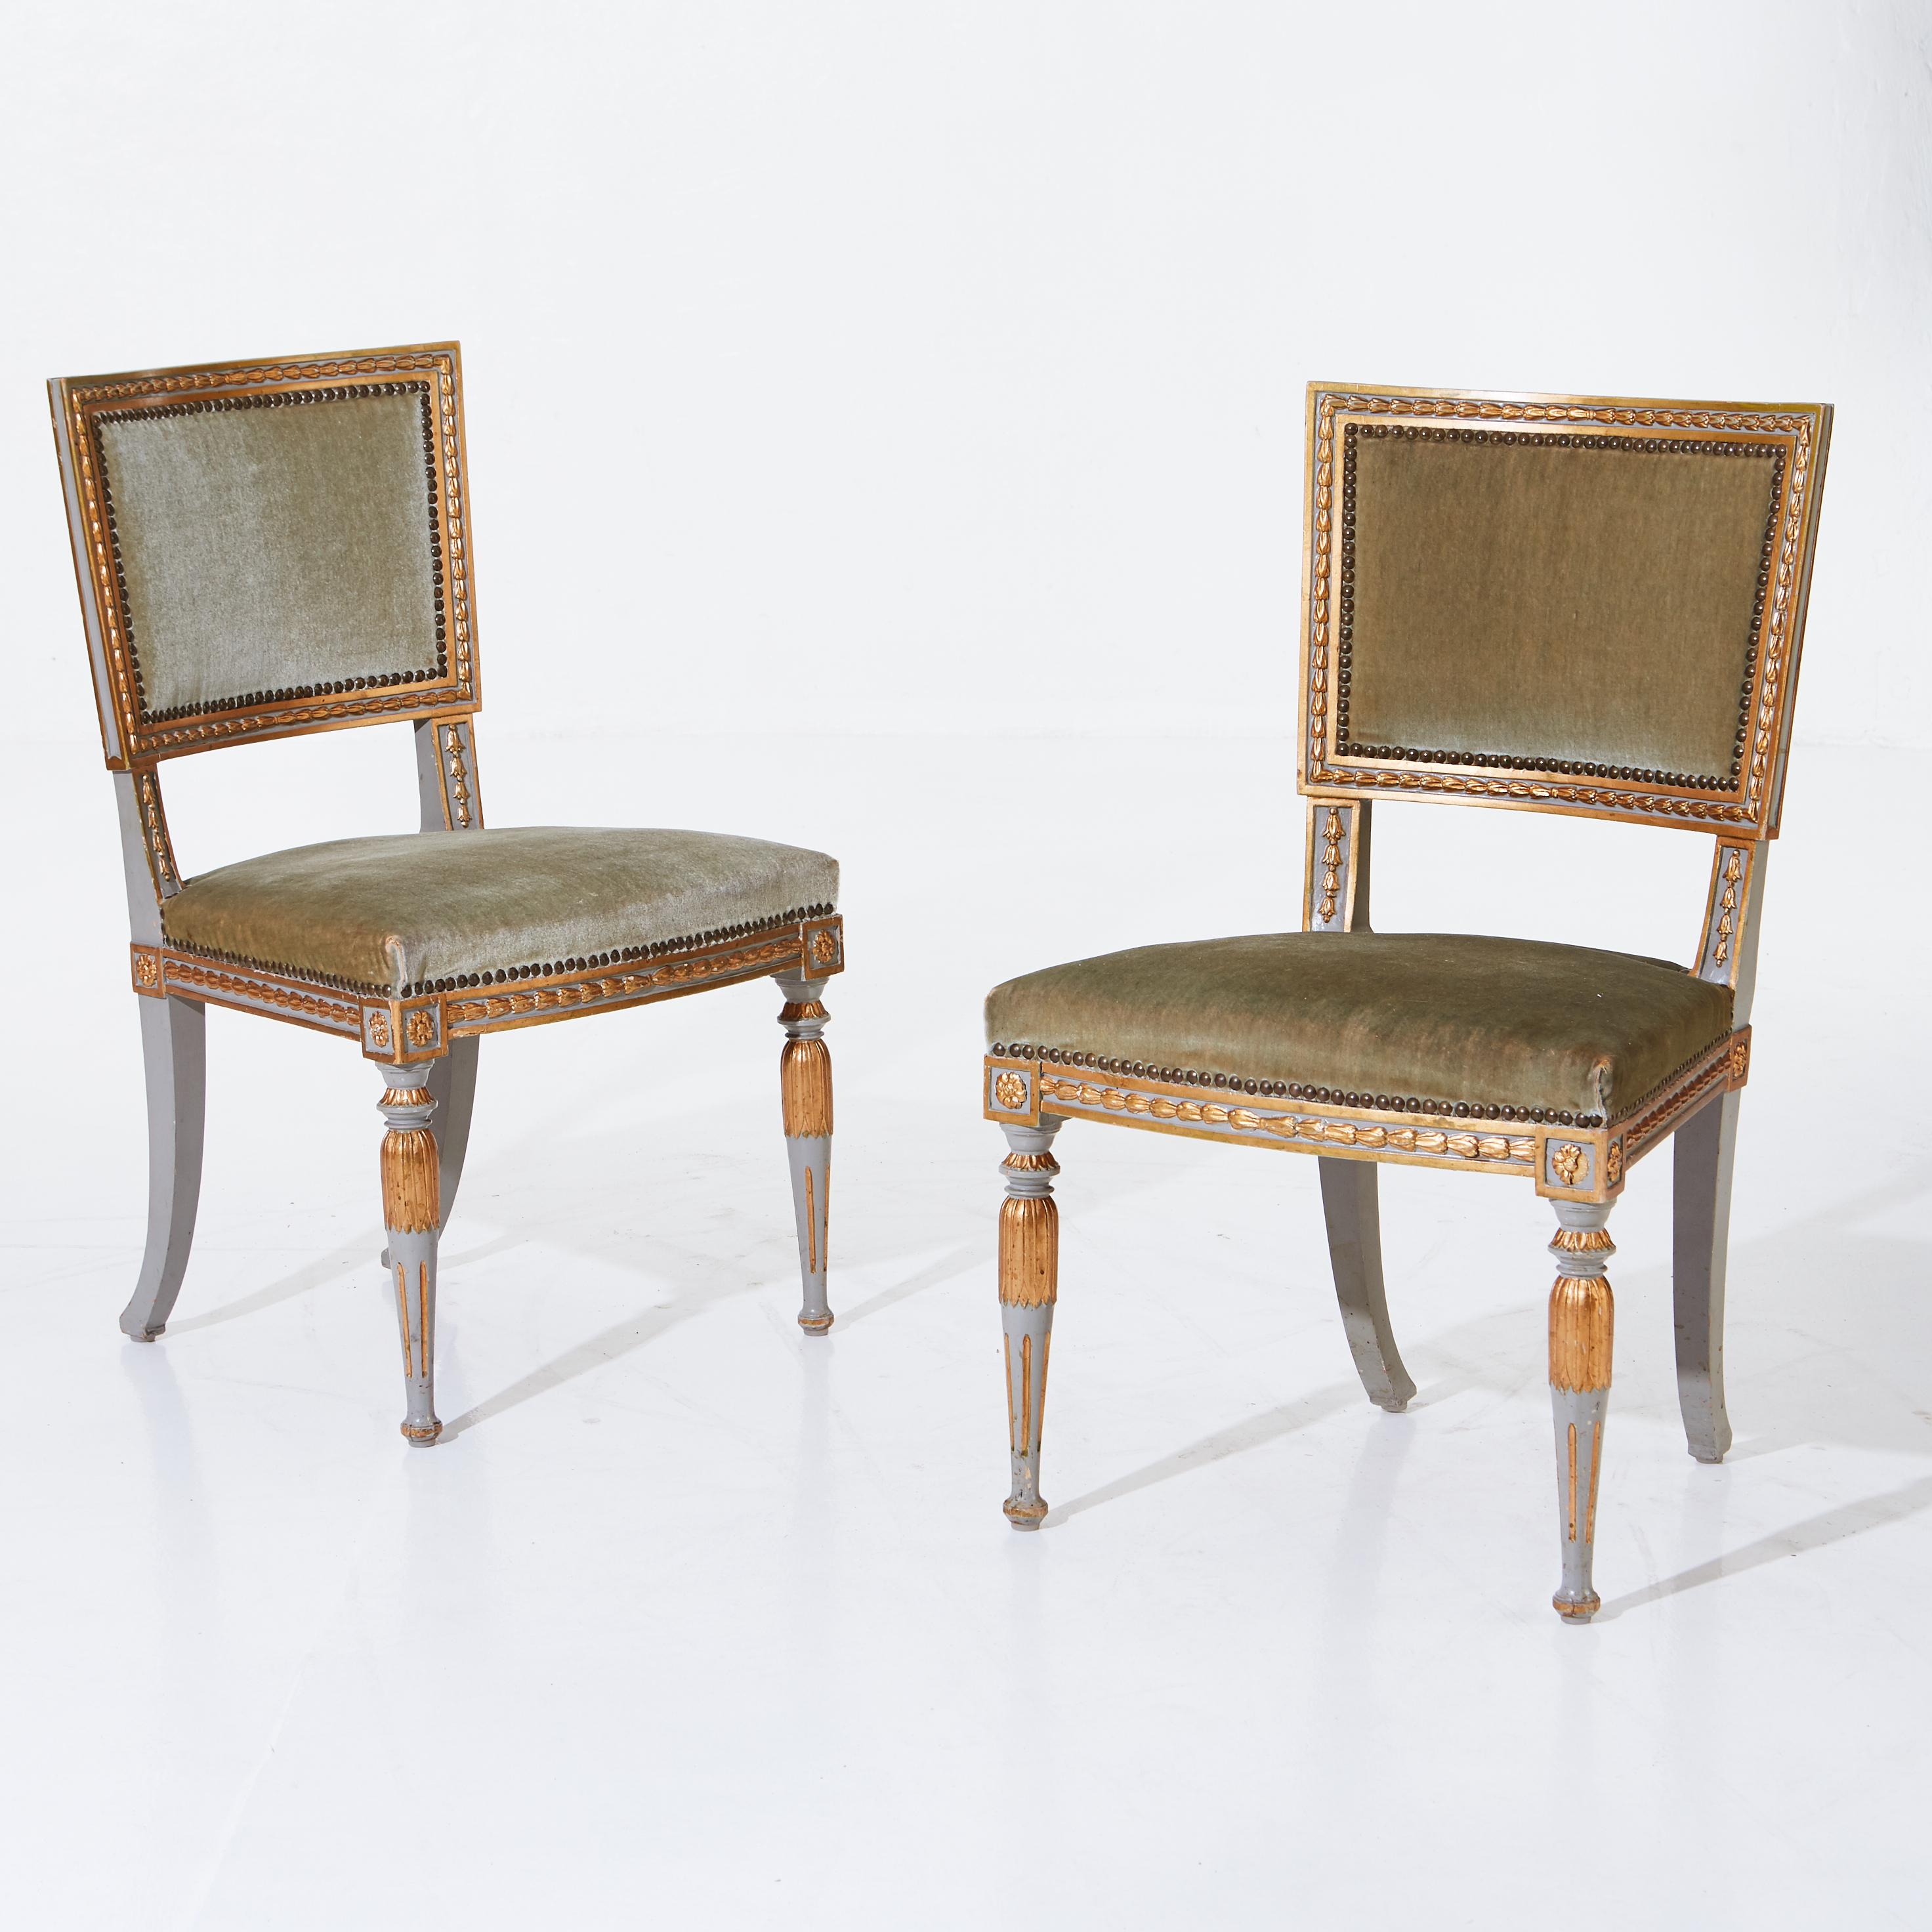 Ephraim Ståhl (1794-1820) was a Swedish furniture maker best known for his chairs. Ståhl was active during the reigns of Gustav IV Adolf, Karl XIII and Karl XIV Johan. All of these kings ordered numerous chairs from his shop. Ståhl’s furniture style